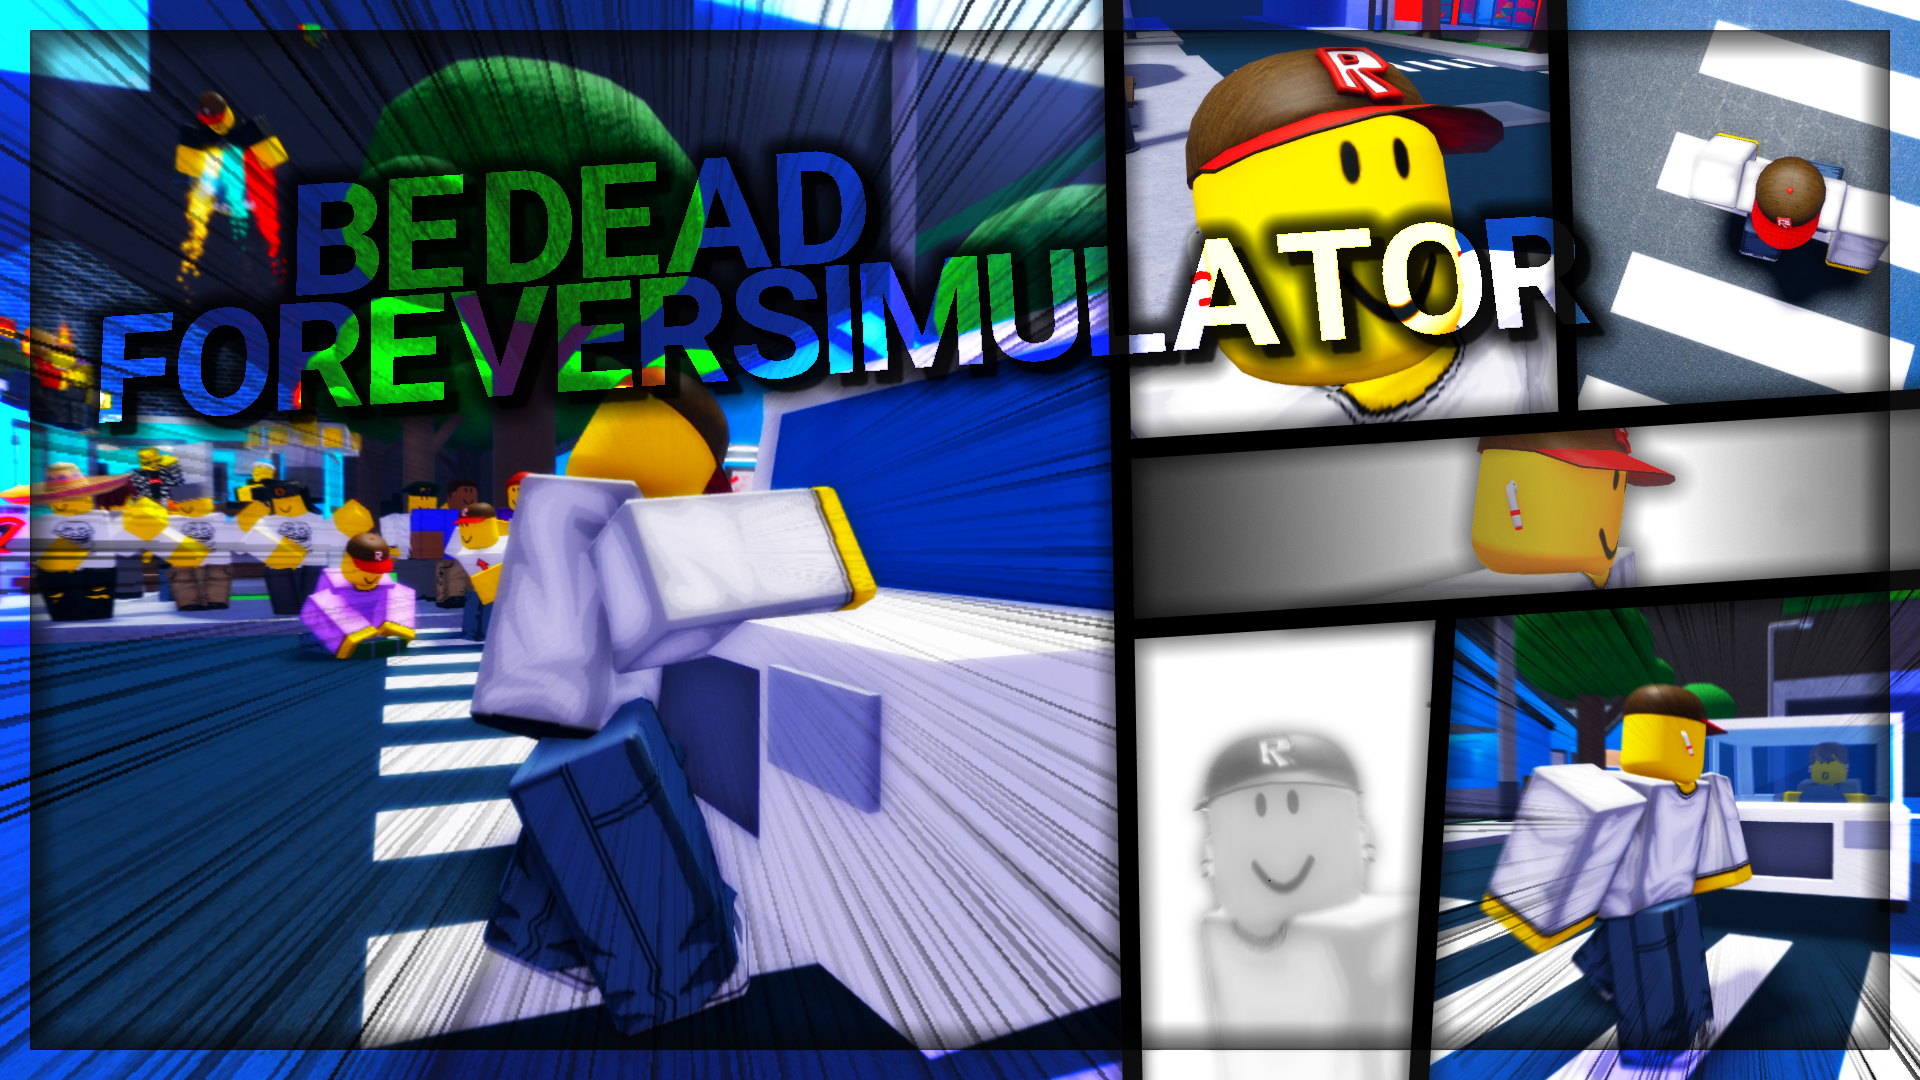 Be Dead Forever Simulator Roblox Wiki Fandom - why is roblox taking forever to download